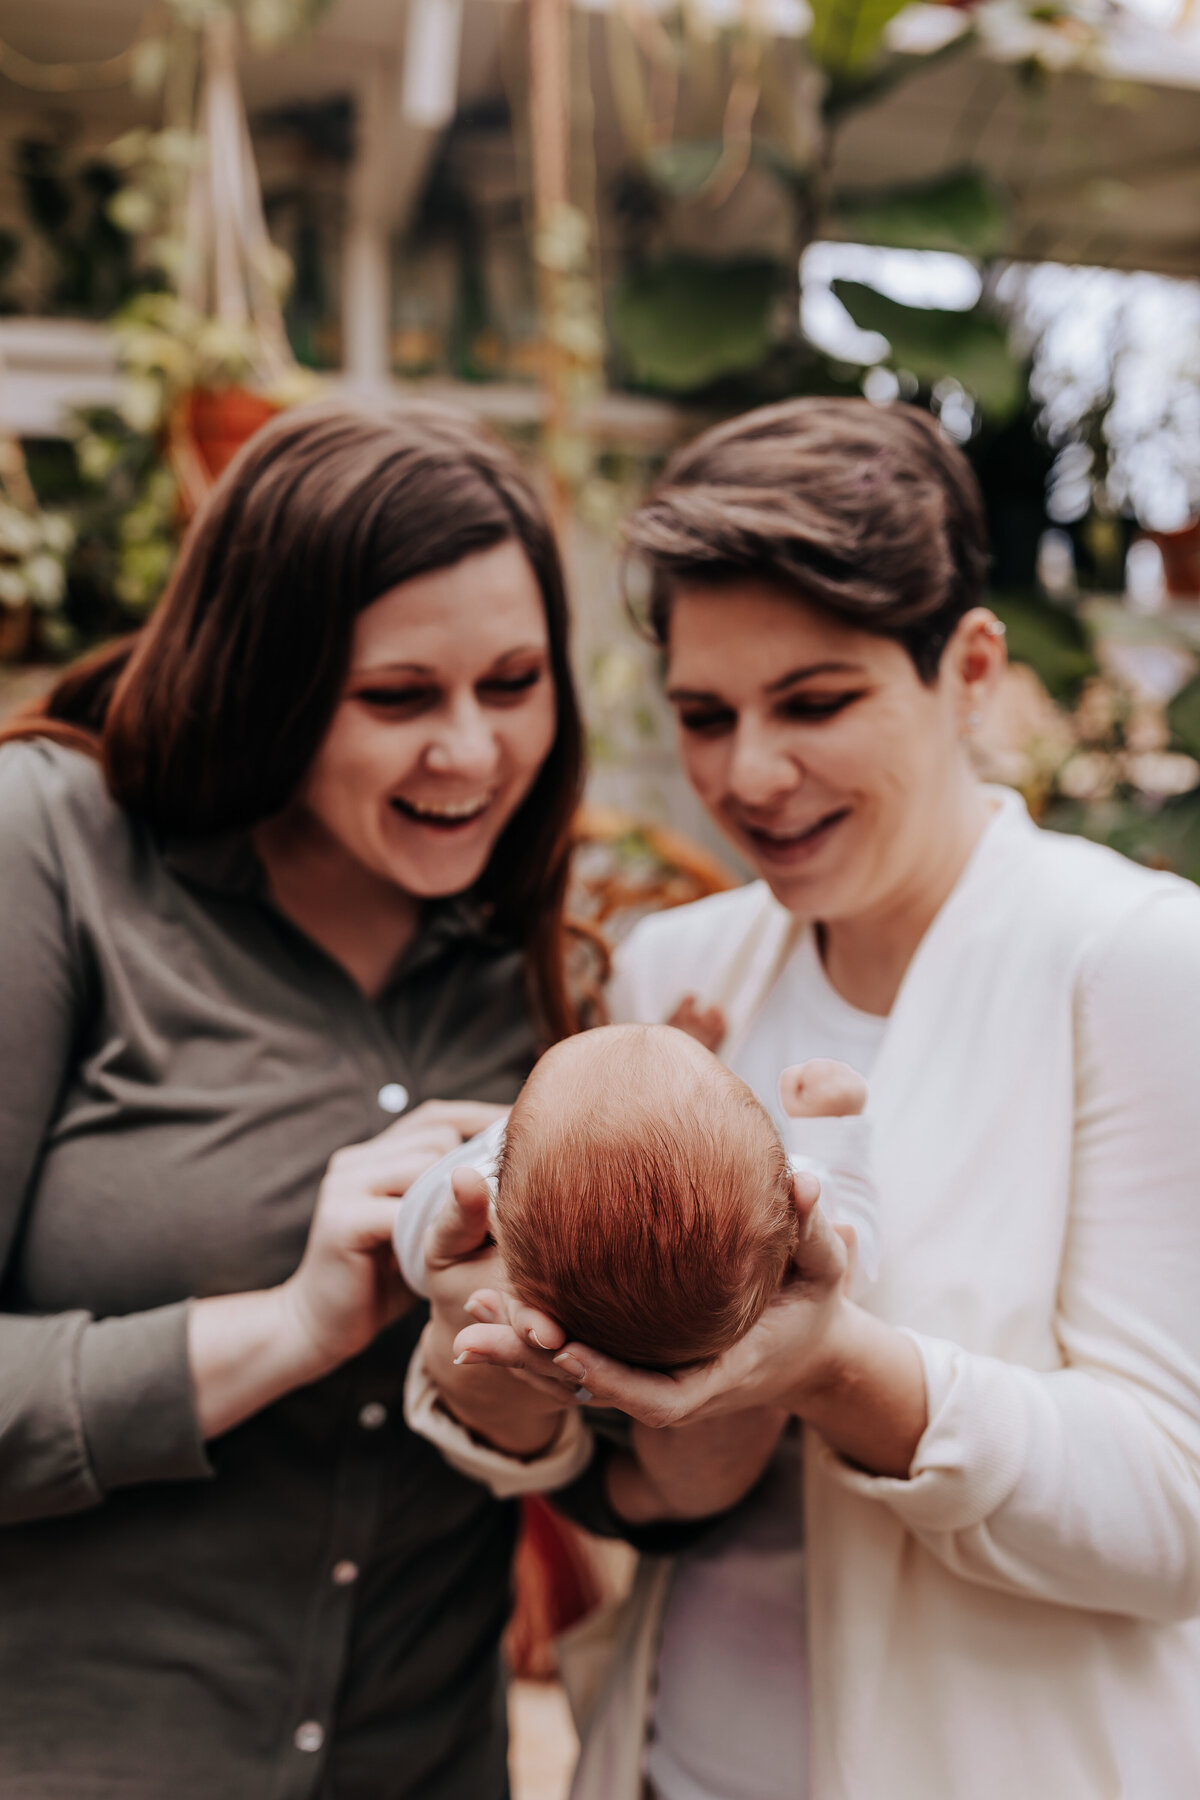 Nashville newborn photographer captures mothers holding baby and smiling